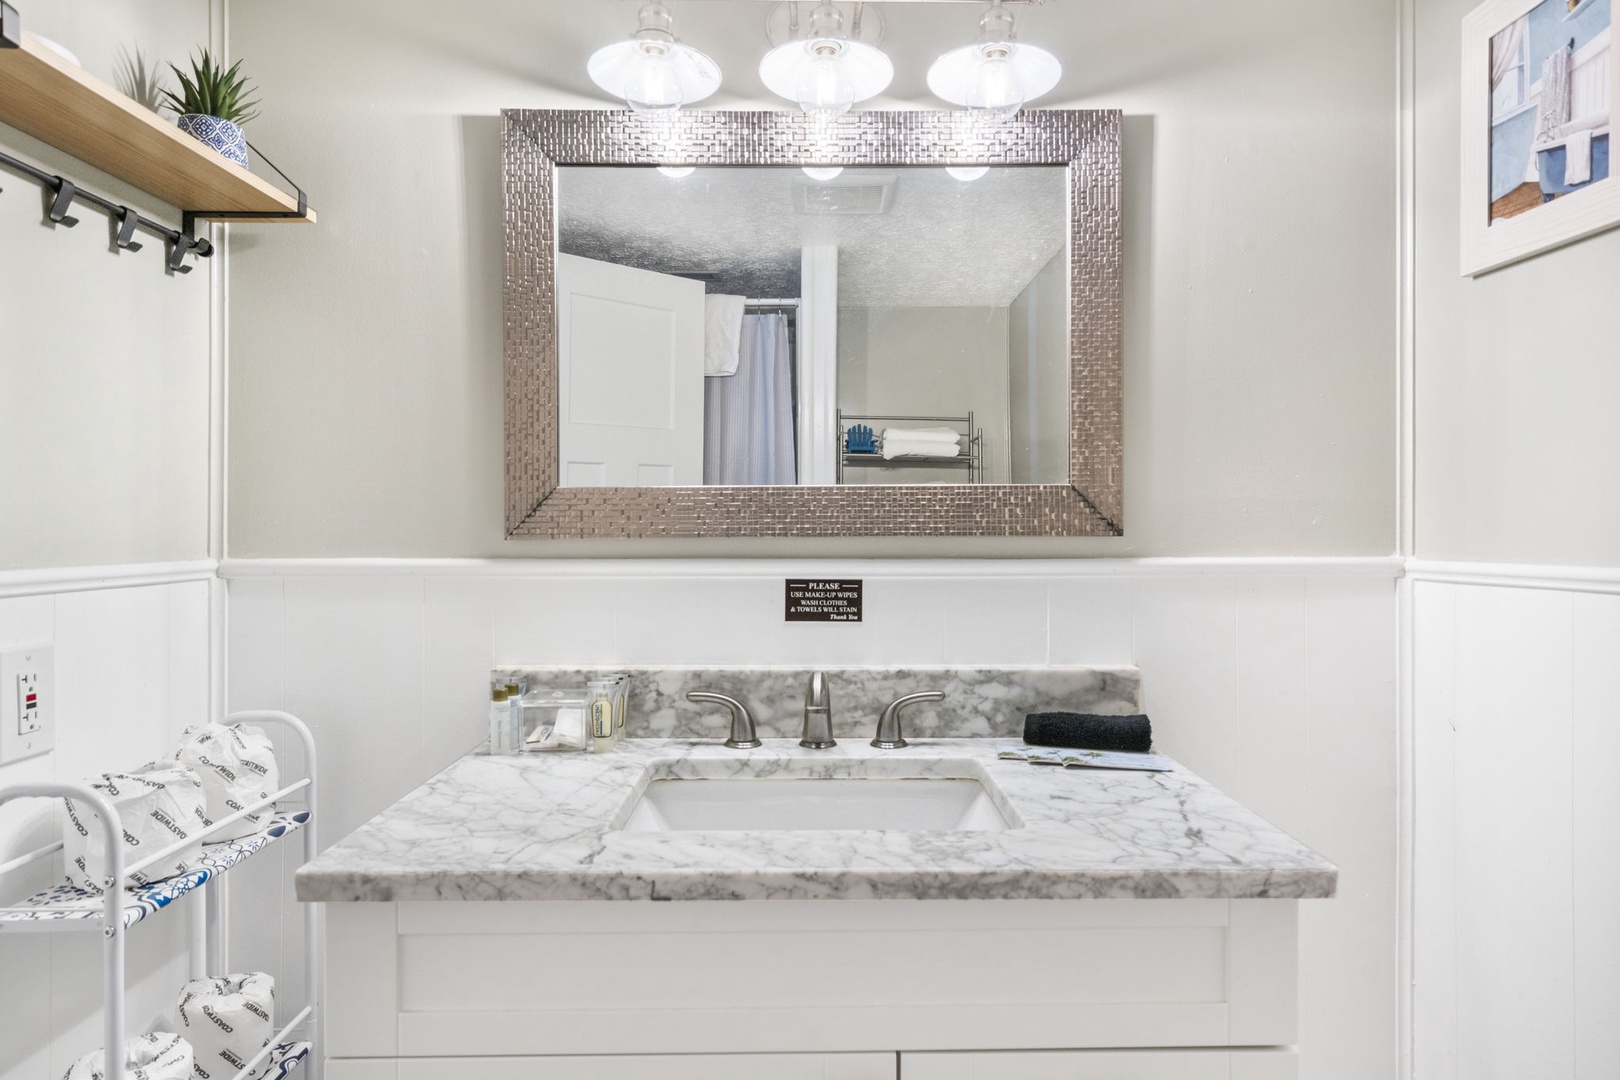 The lower-level full bathroom includes a single vanity & walk-in shower